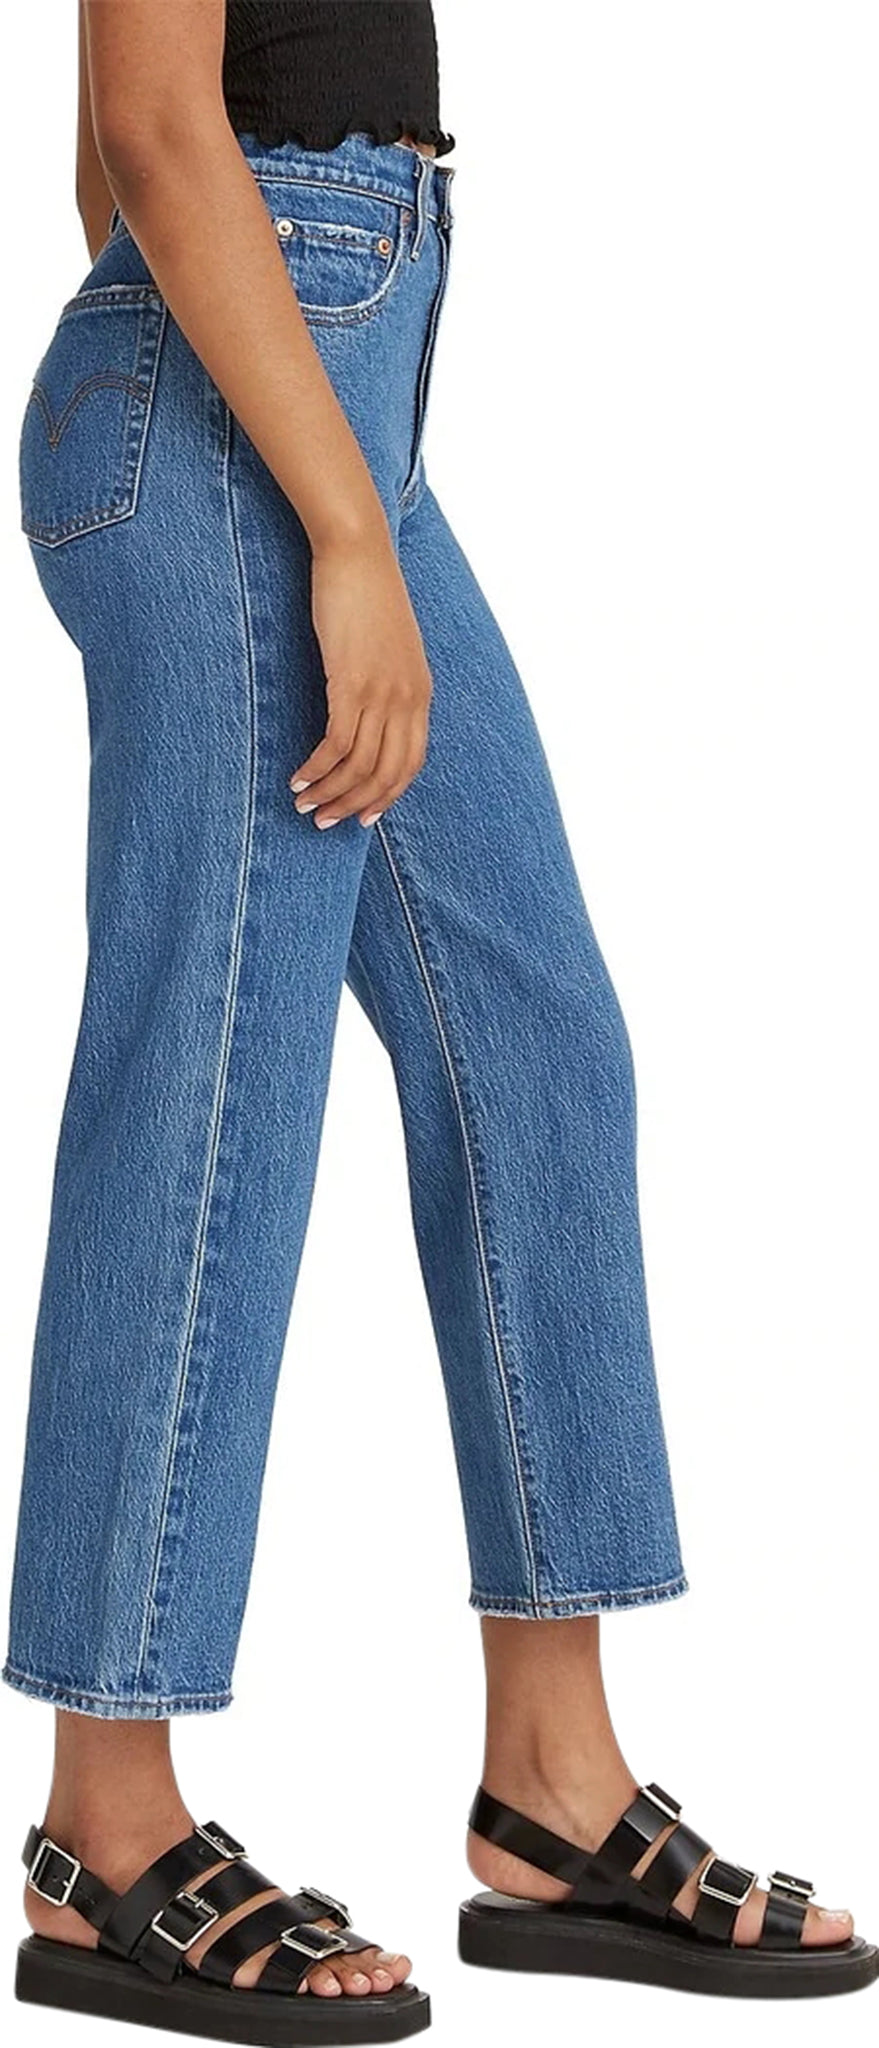 Ribcage Straight Ankle Jeans - Blue